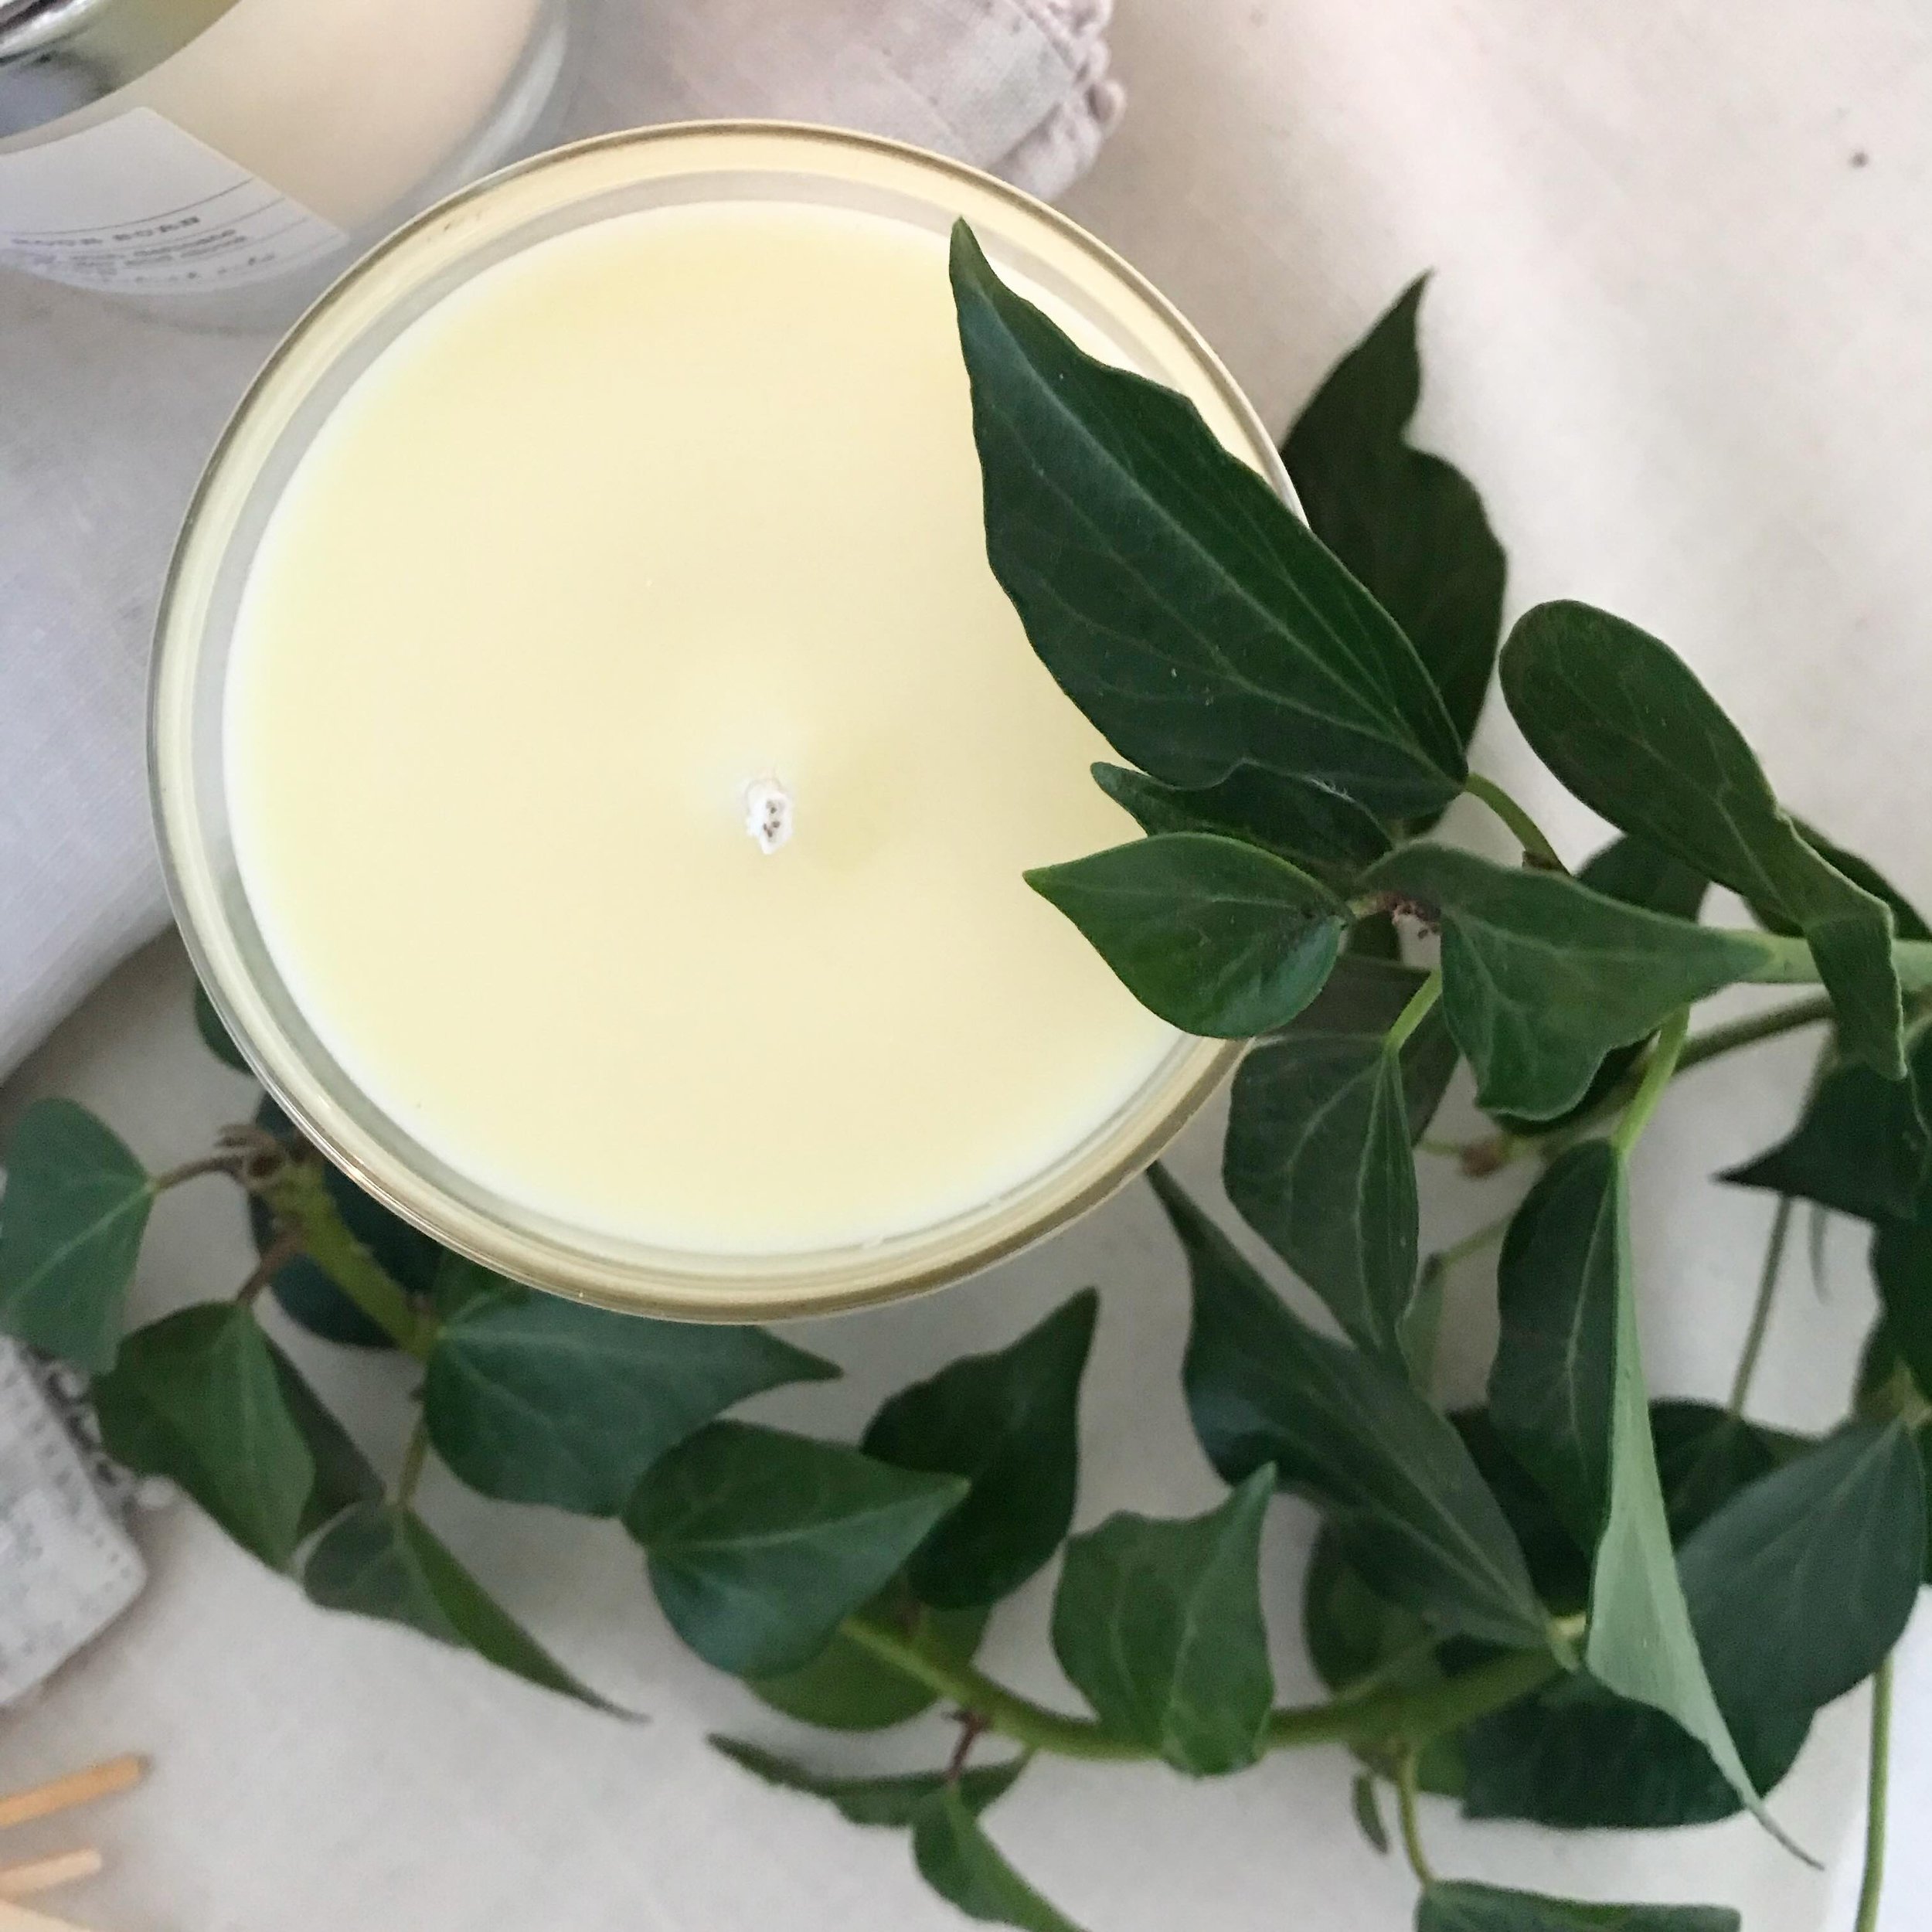 Summer candles are just as gorg imo 🕯️I love working on scents that compliment the summer air, and hope I&rsquo;ll have a new one perfected soon 🍃

#summerscents #candles #summercandles #summerair #handmadecandles #homescent #homefragrance #sweetsm